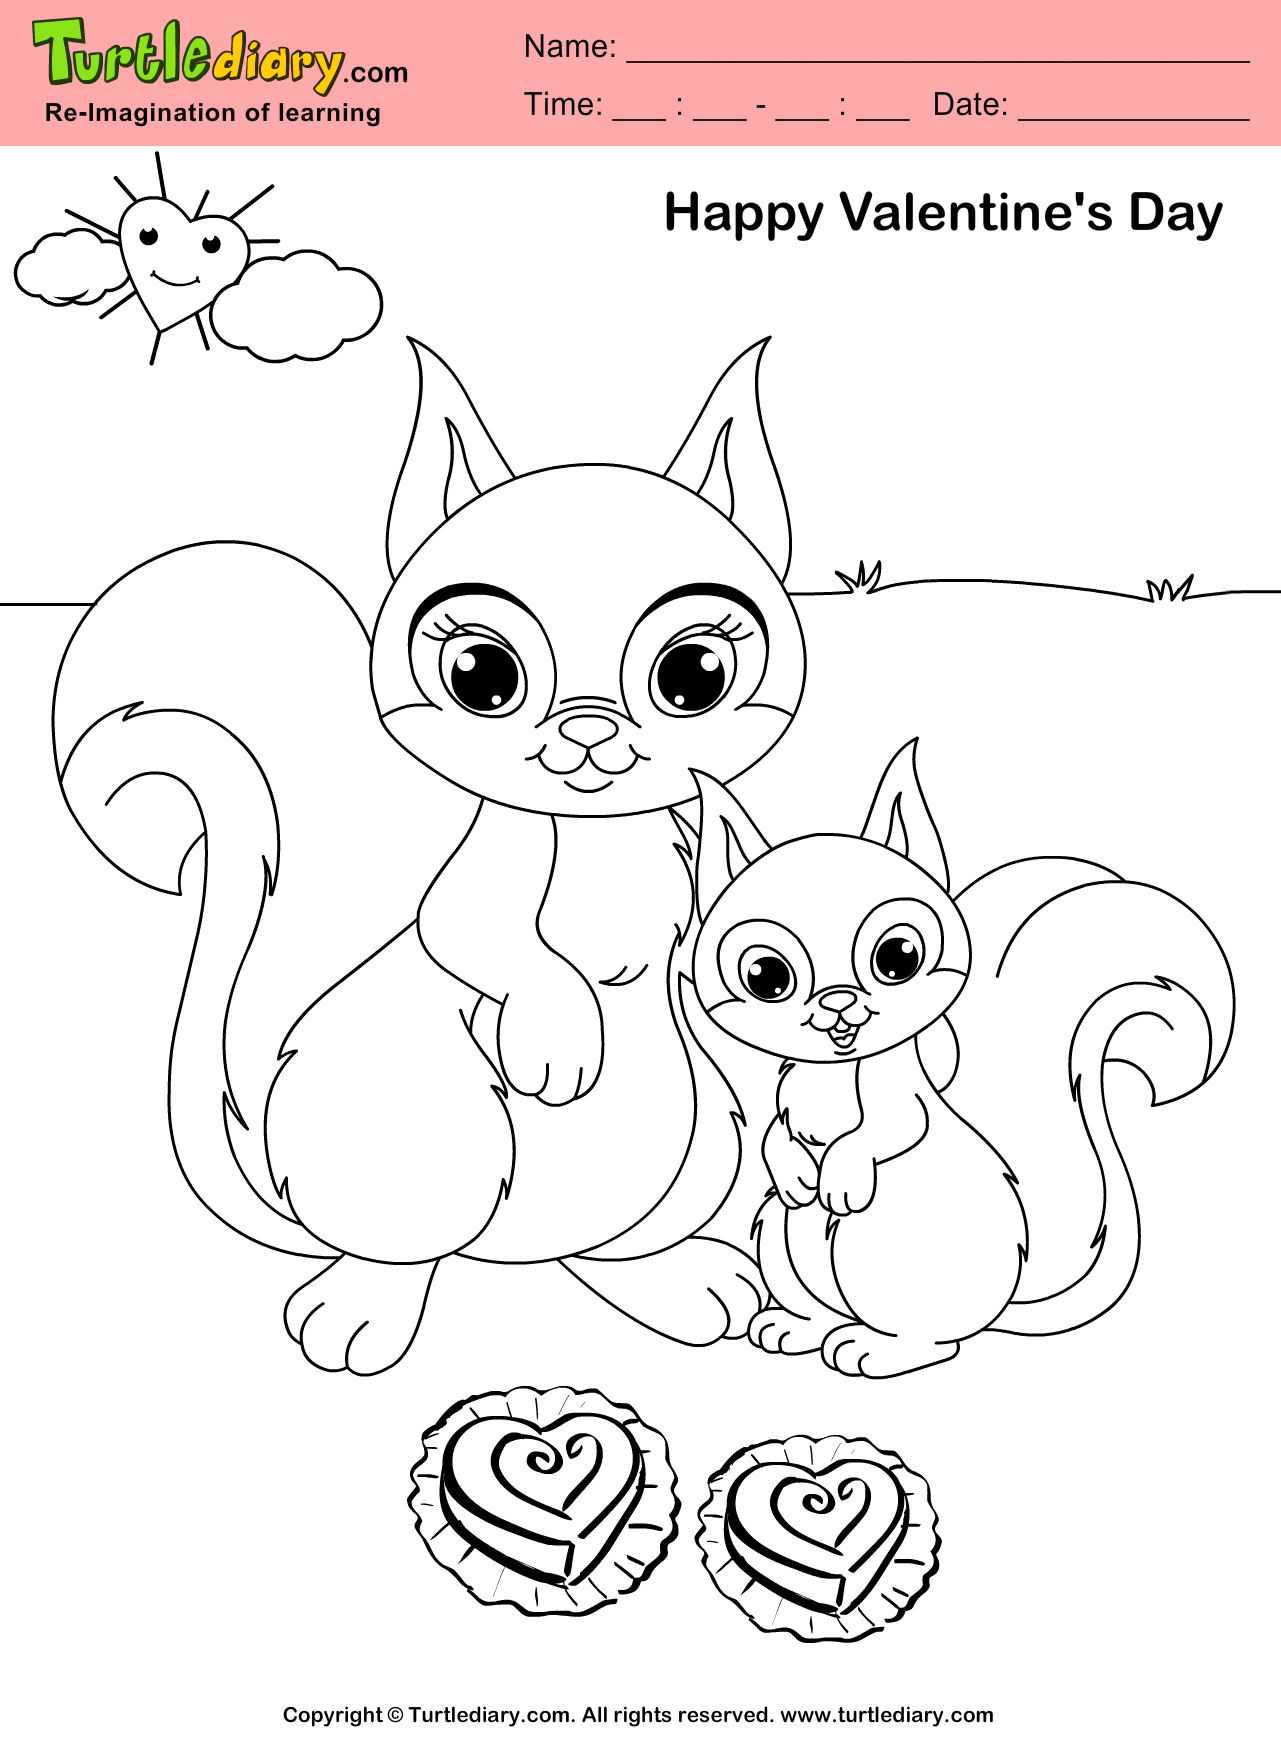 Squirrel Valentine Day Coloring Page